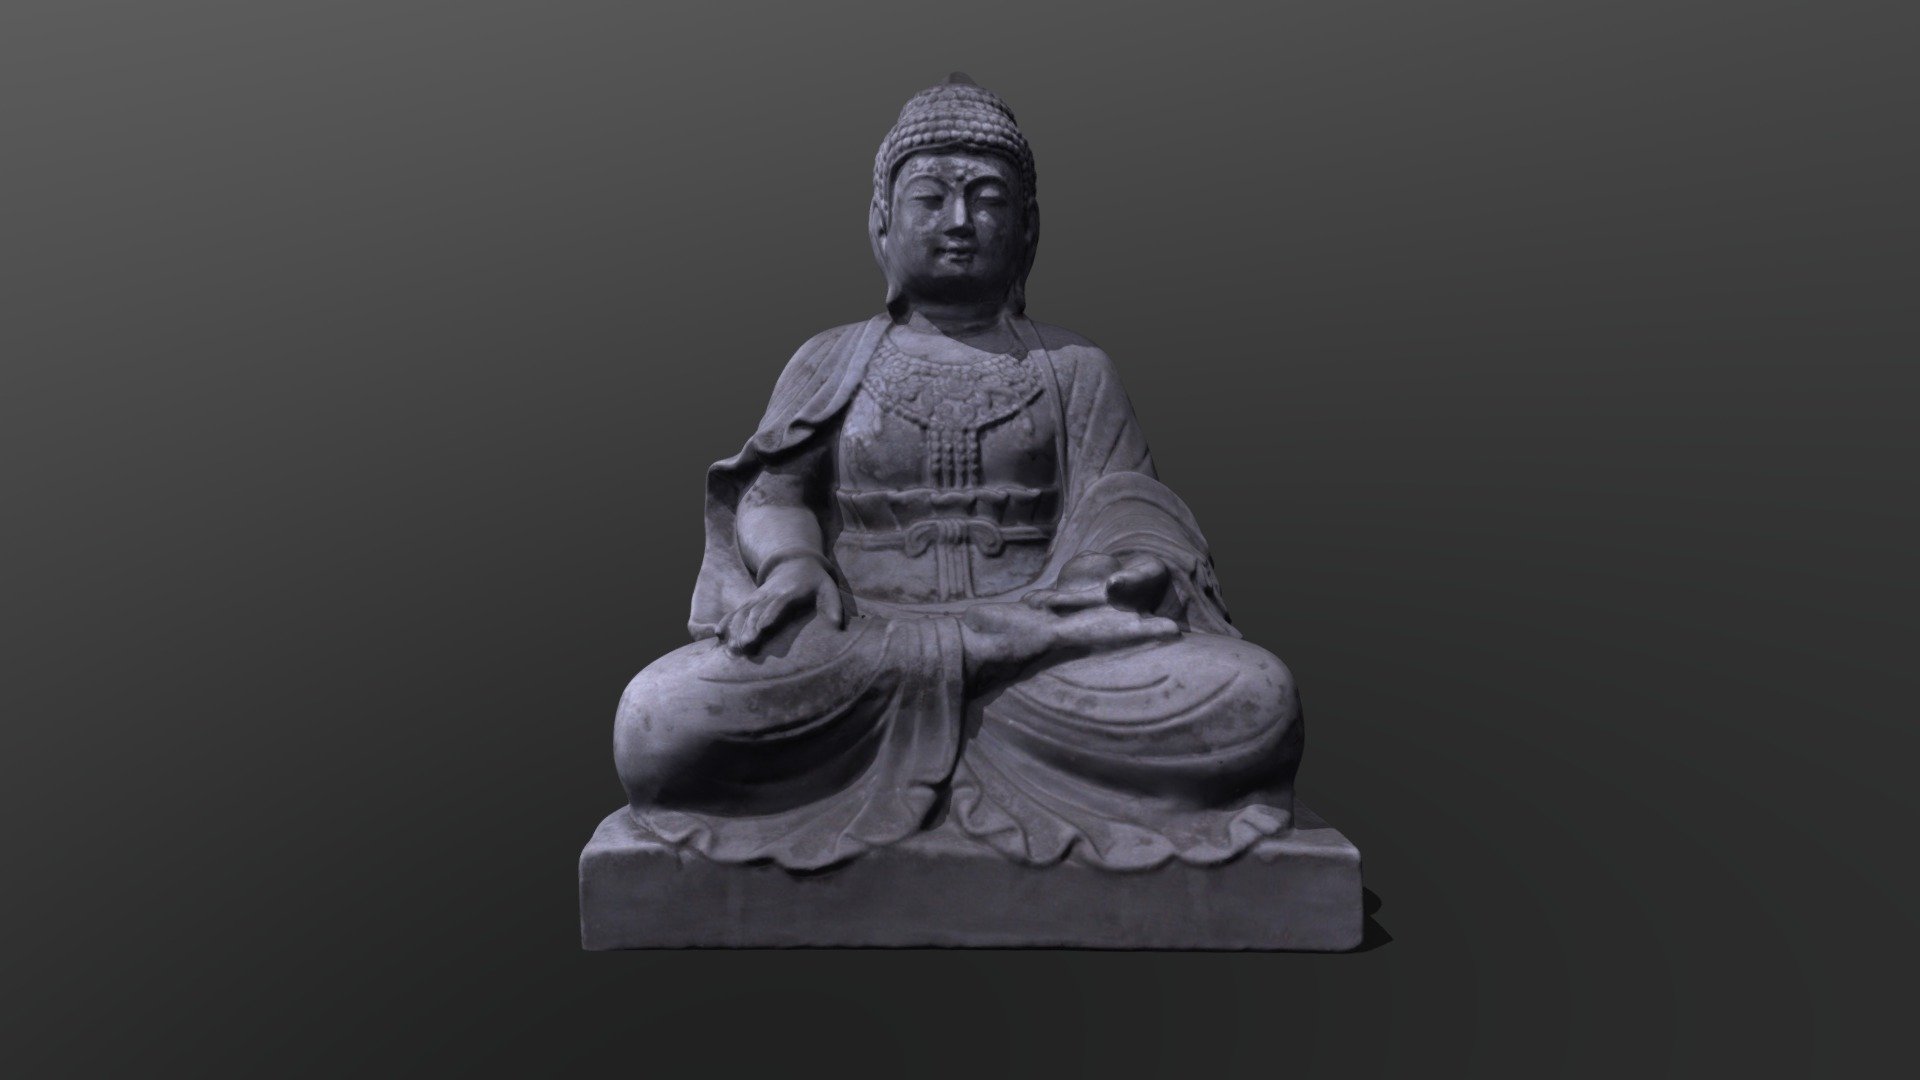 The icon of the Buddha is to be treated with respect. The Buddha was a teacher and an “enlightened being”, the statues and icons of them are meant as objects for teaching and guiding.

This model is splendid for 3d printing. The underneath of this model is a solid flat surface. It shows differently here 3d model